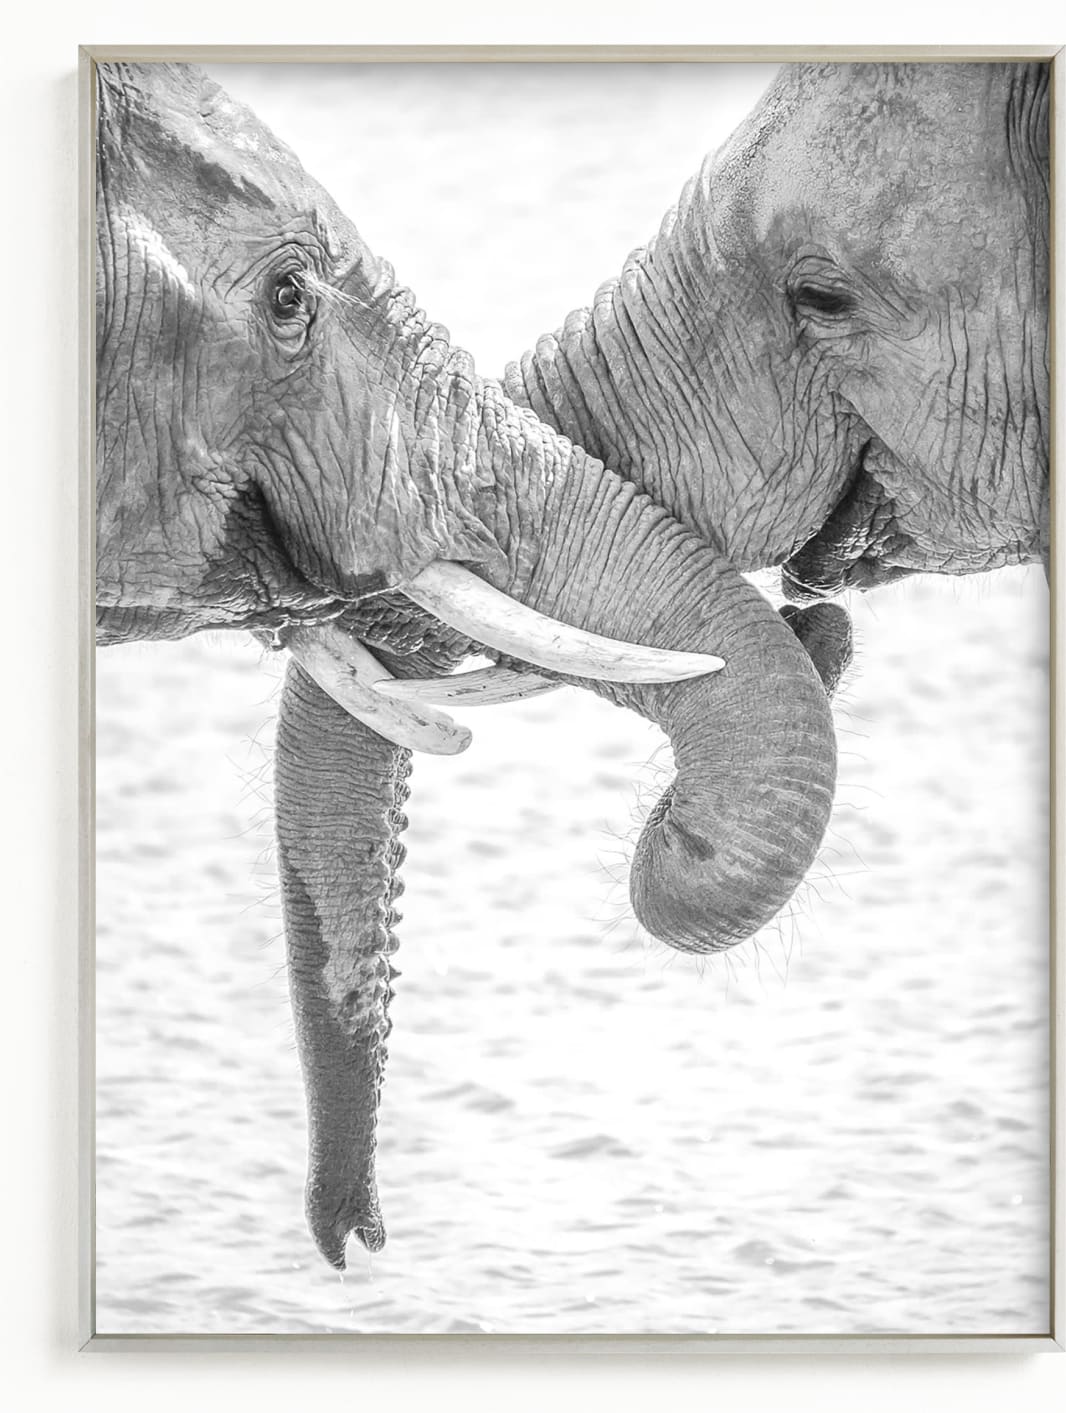 This is a black and white art by Jennifer Mckinnon Richman called Elephant Love.